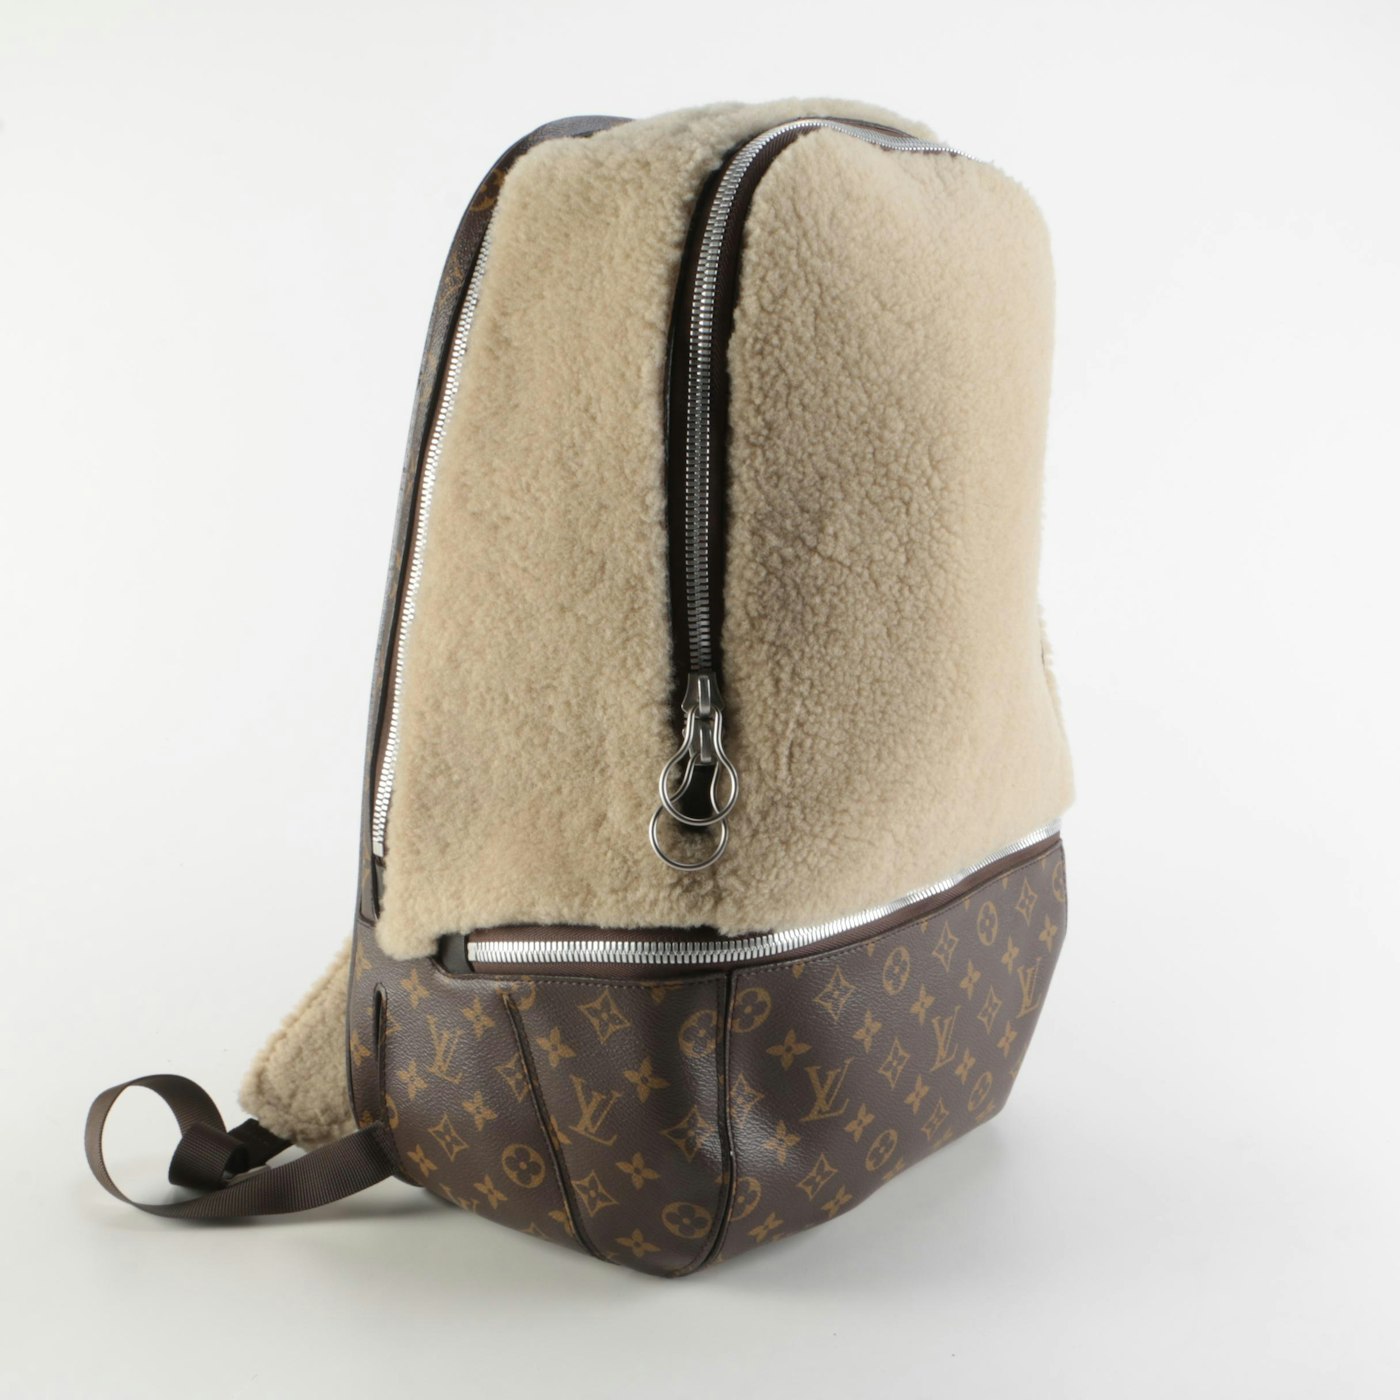 frank gehry + marc newson among designers of louis vuitton iconoclasts  series